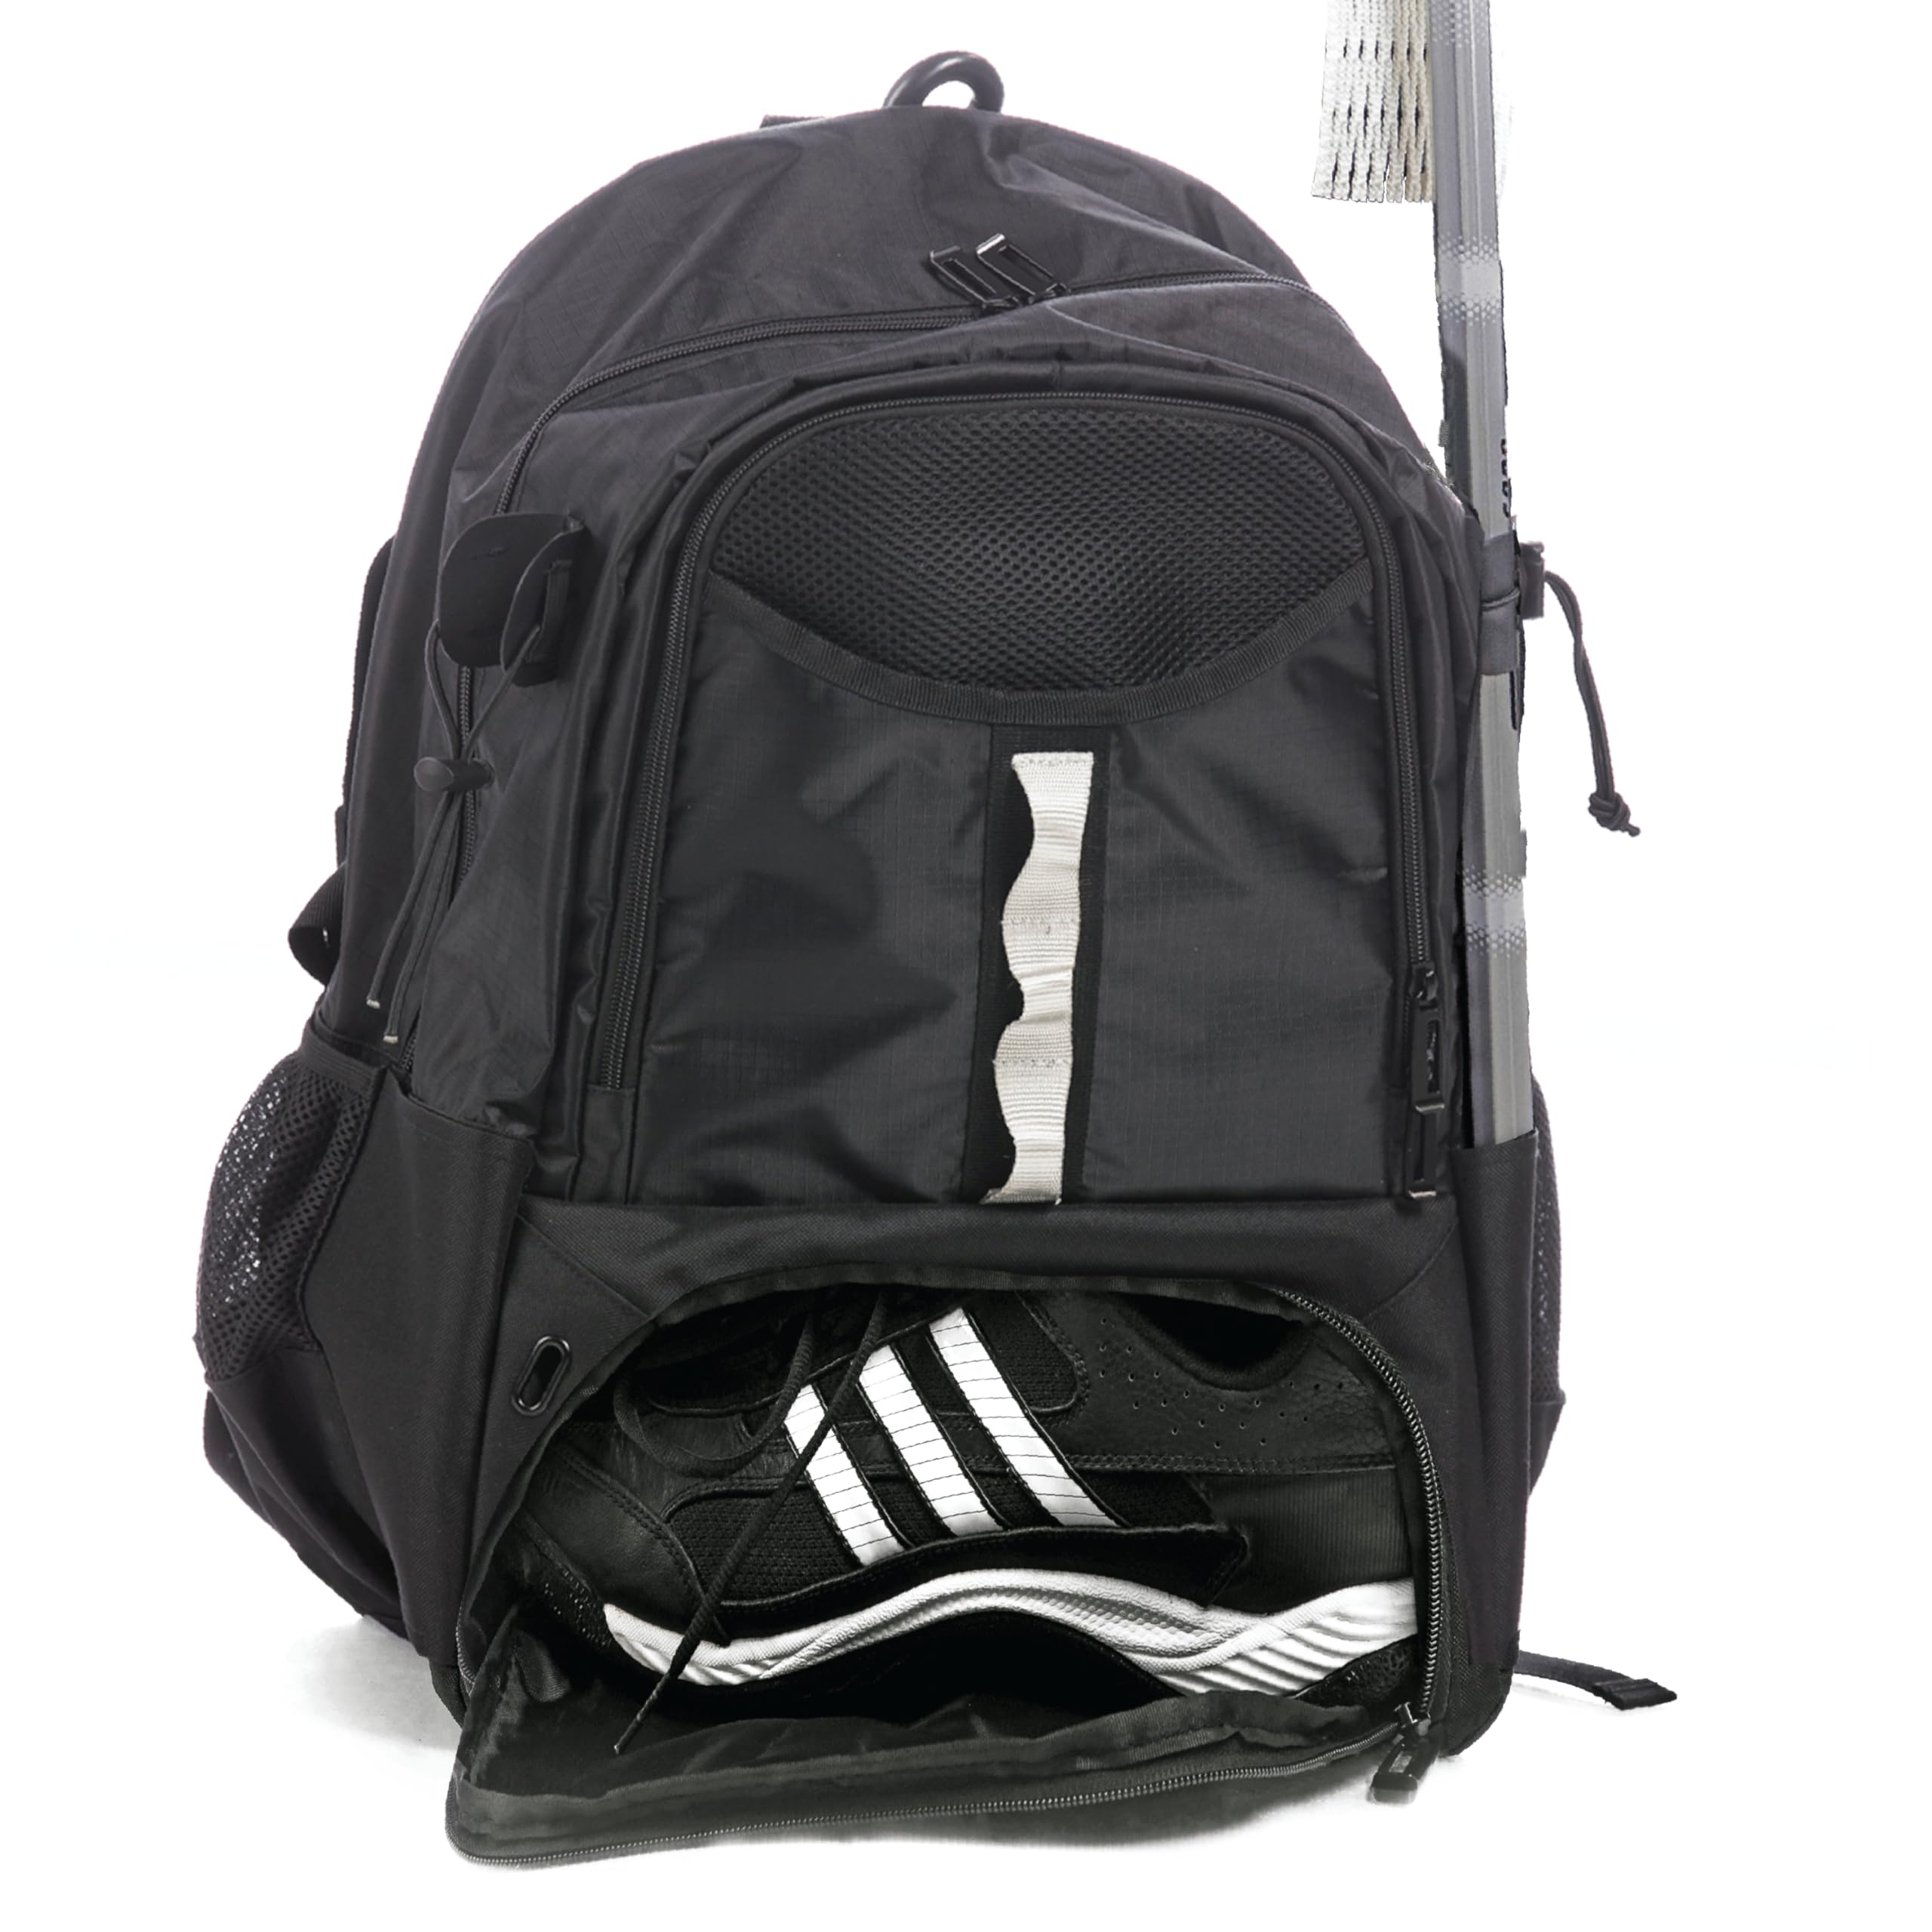 Athletico Turf Lacrosse Bag - Extra Large Lacrosse Backpack - Holds All Lacrosse or Field Hockey Equipment - Two Stick Holders and Separate Cleats Compartment  - Very Good